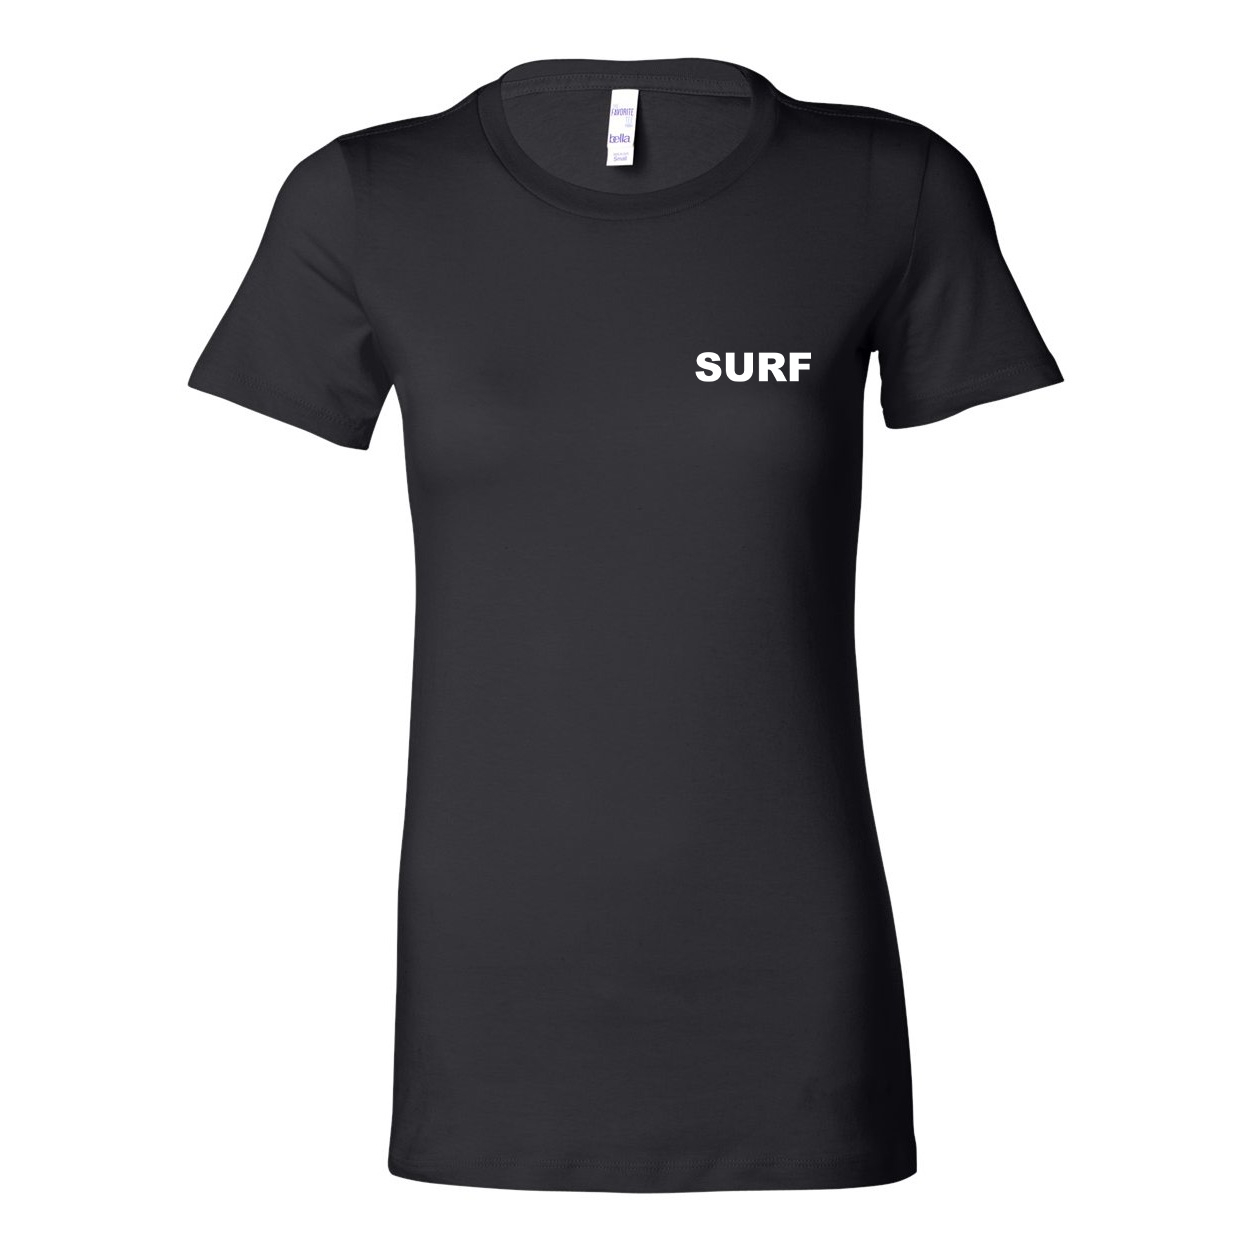 Surf Brand Logo Women's Night Out Fitted Tri-Blend T-Shirt Black